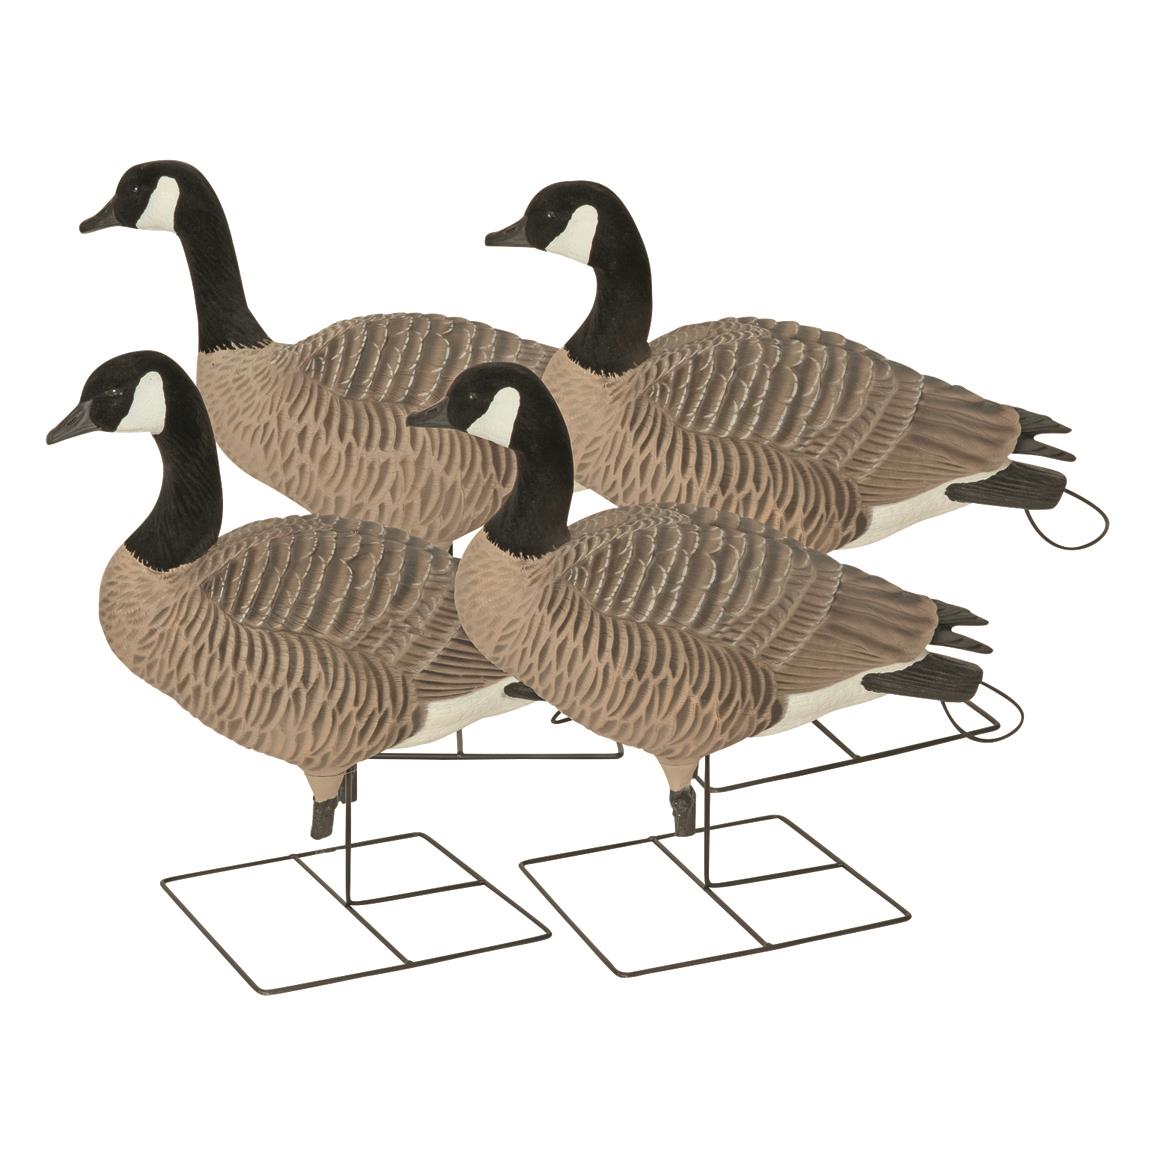 Avery GHG Pro-Grade XD Series Canada Goose Full Body Active Decoys, 4 Pack